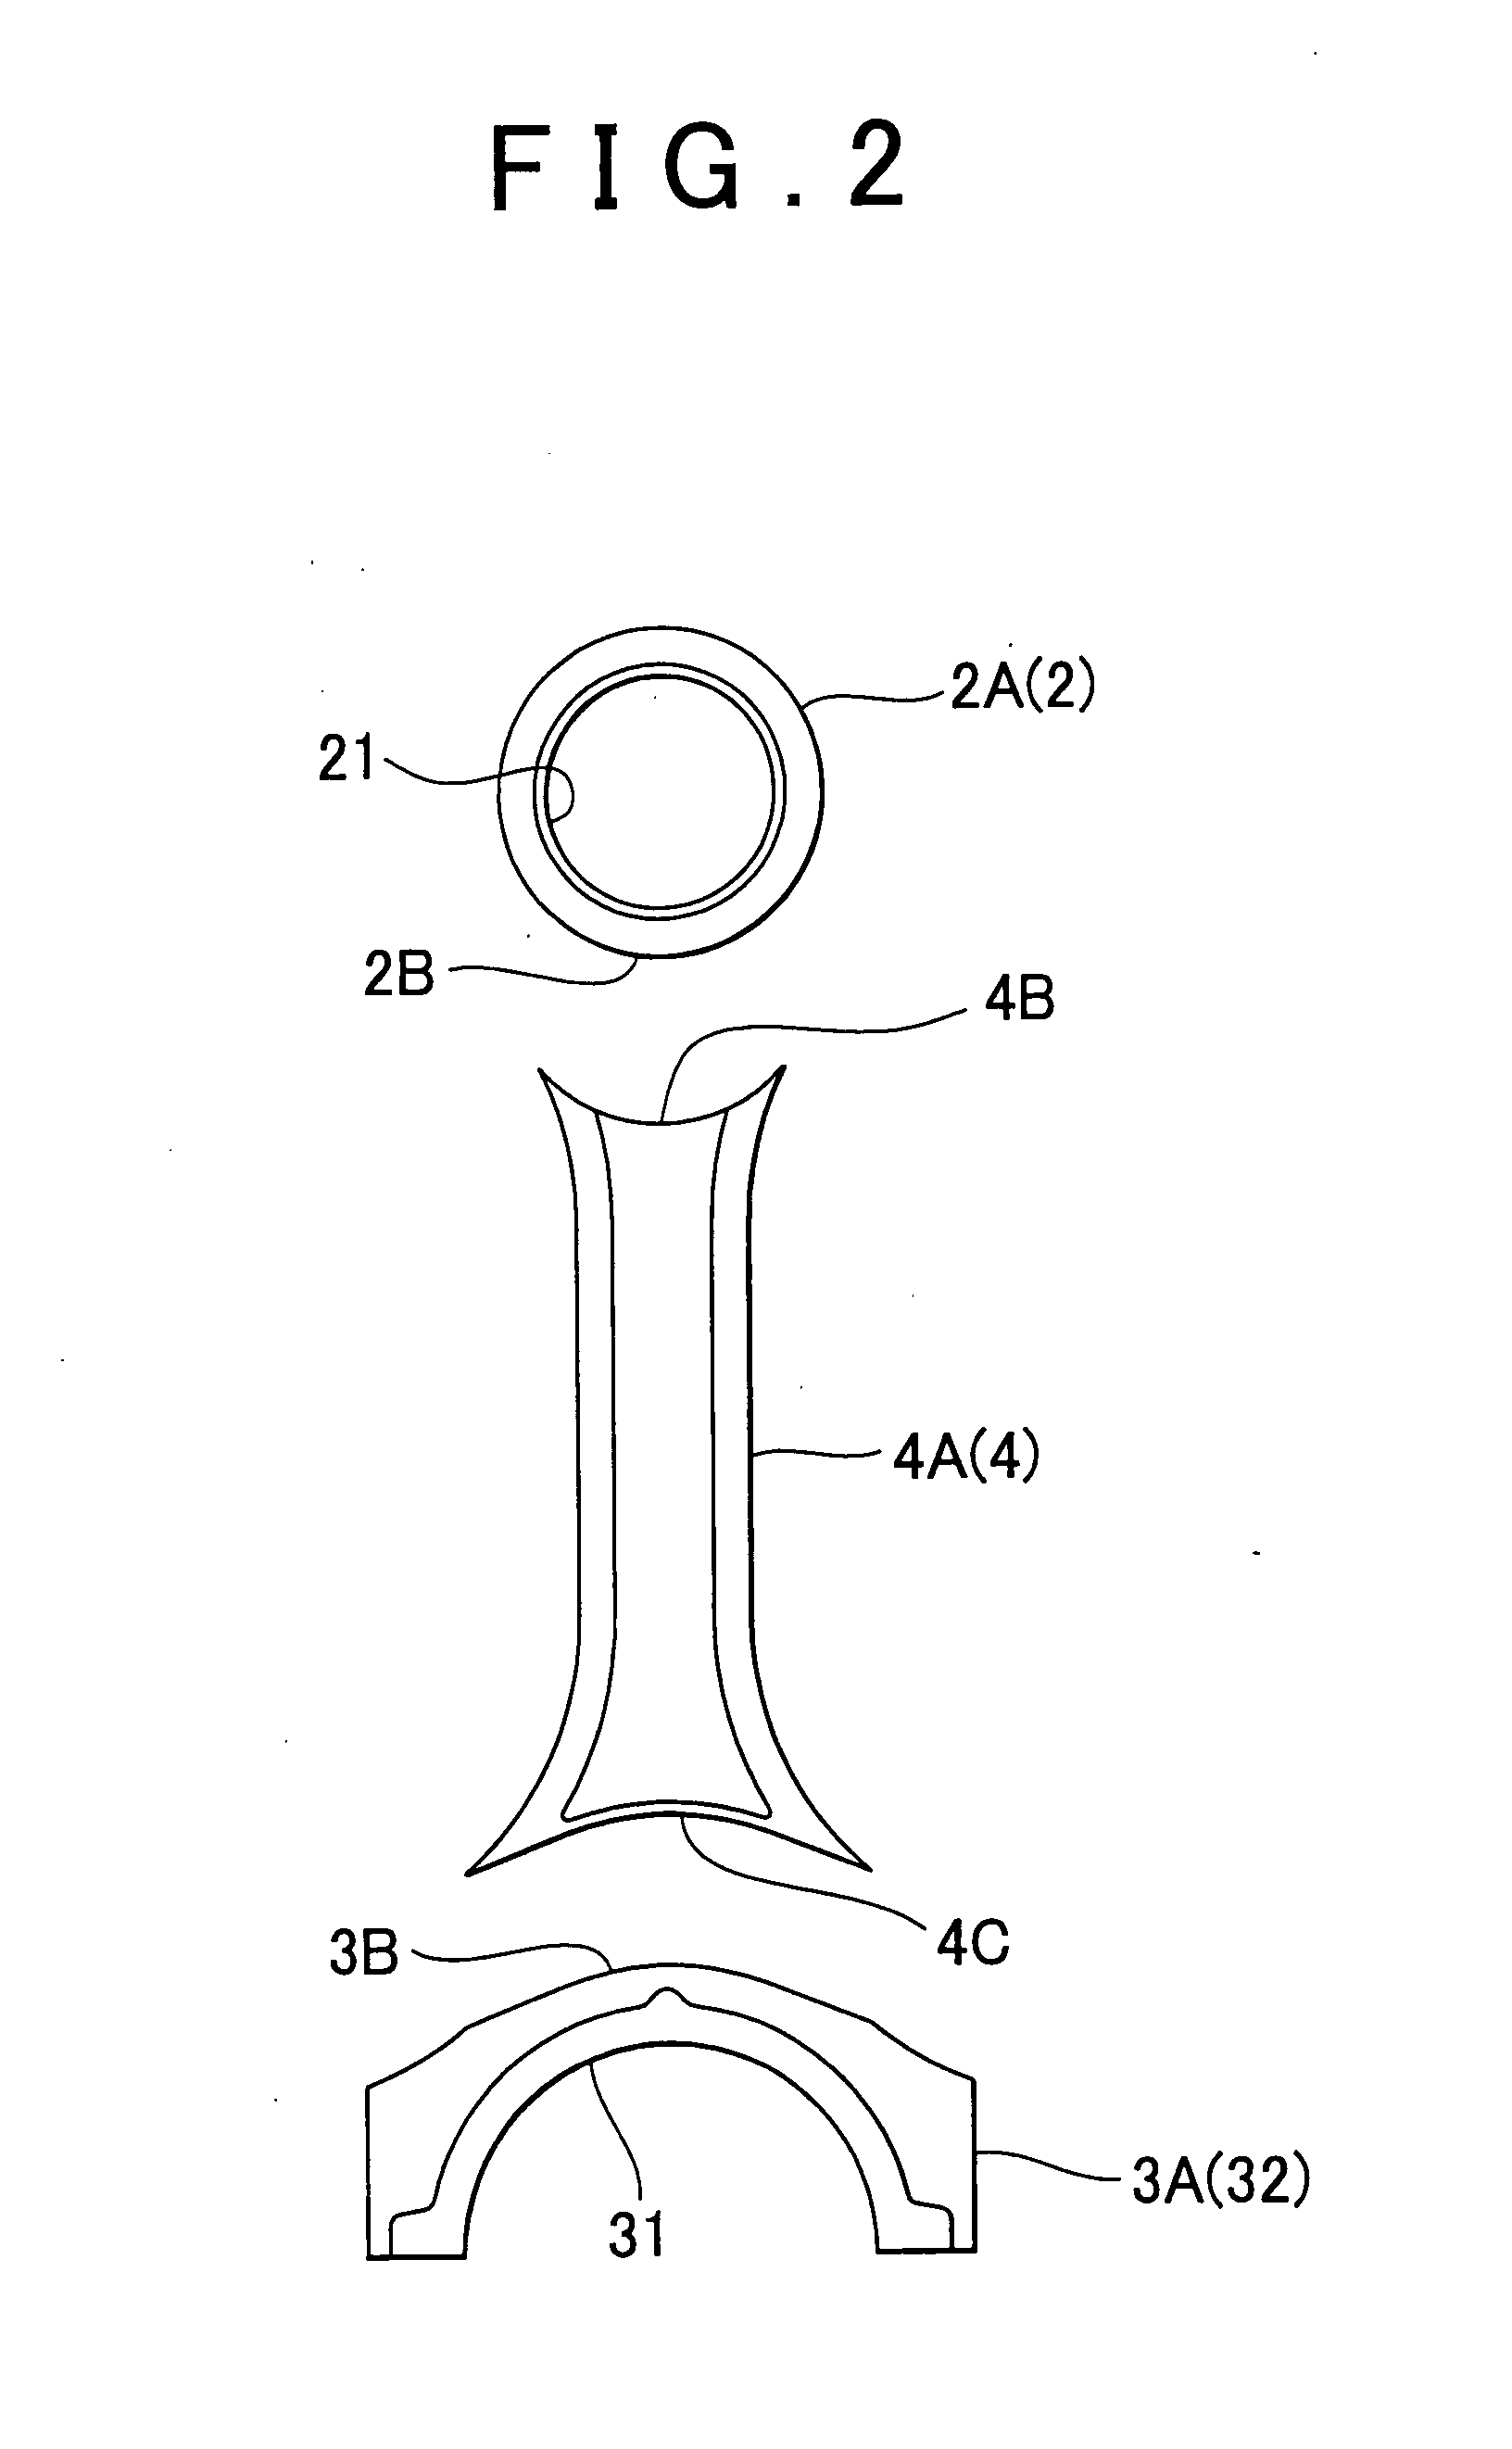 Connecting rod for internal combustion engine and method of manufacturing the connecting rod